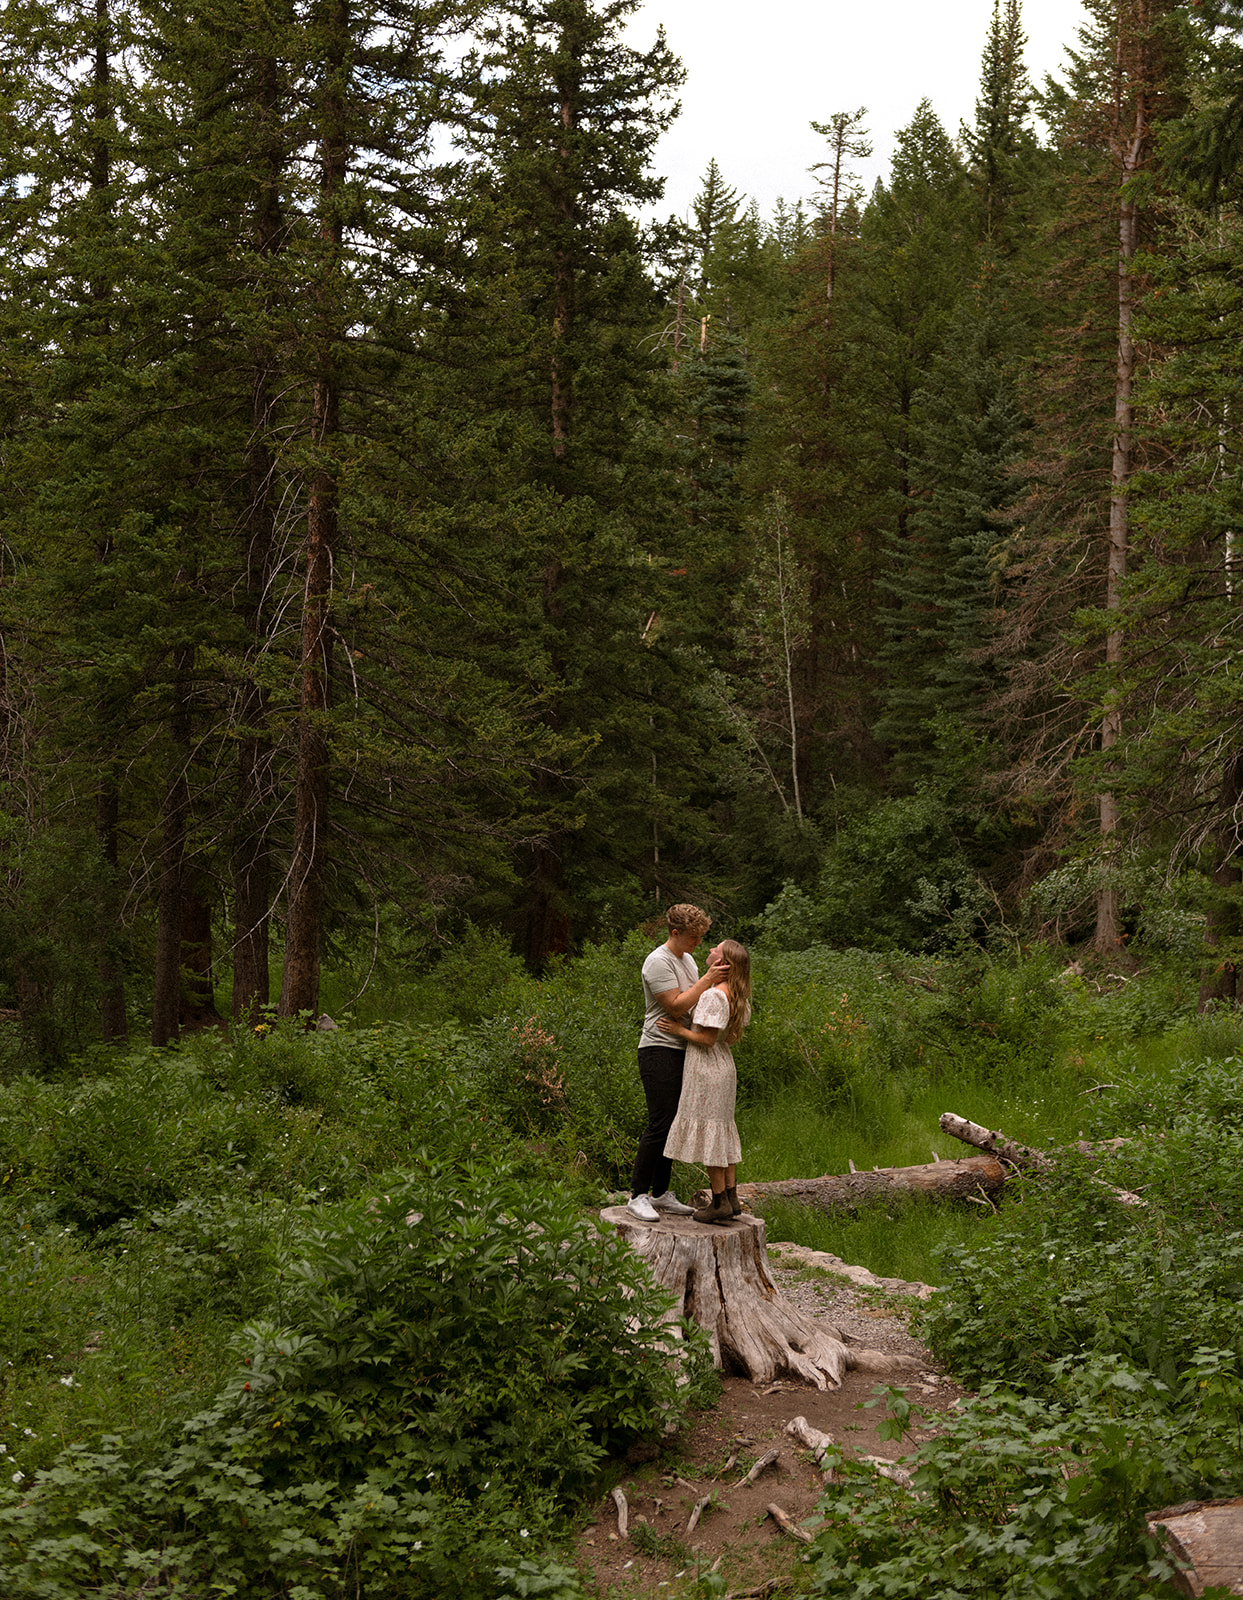 Magical and romantic evening in the Utah mountains, surrounded by lush greens